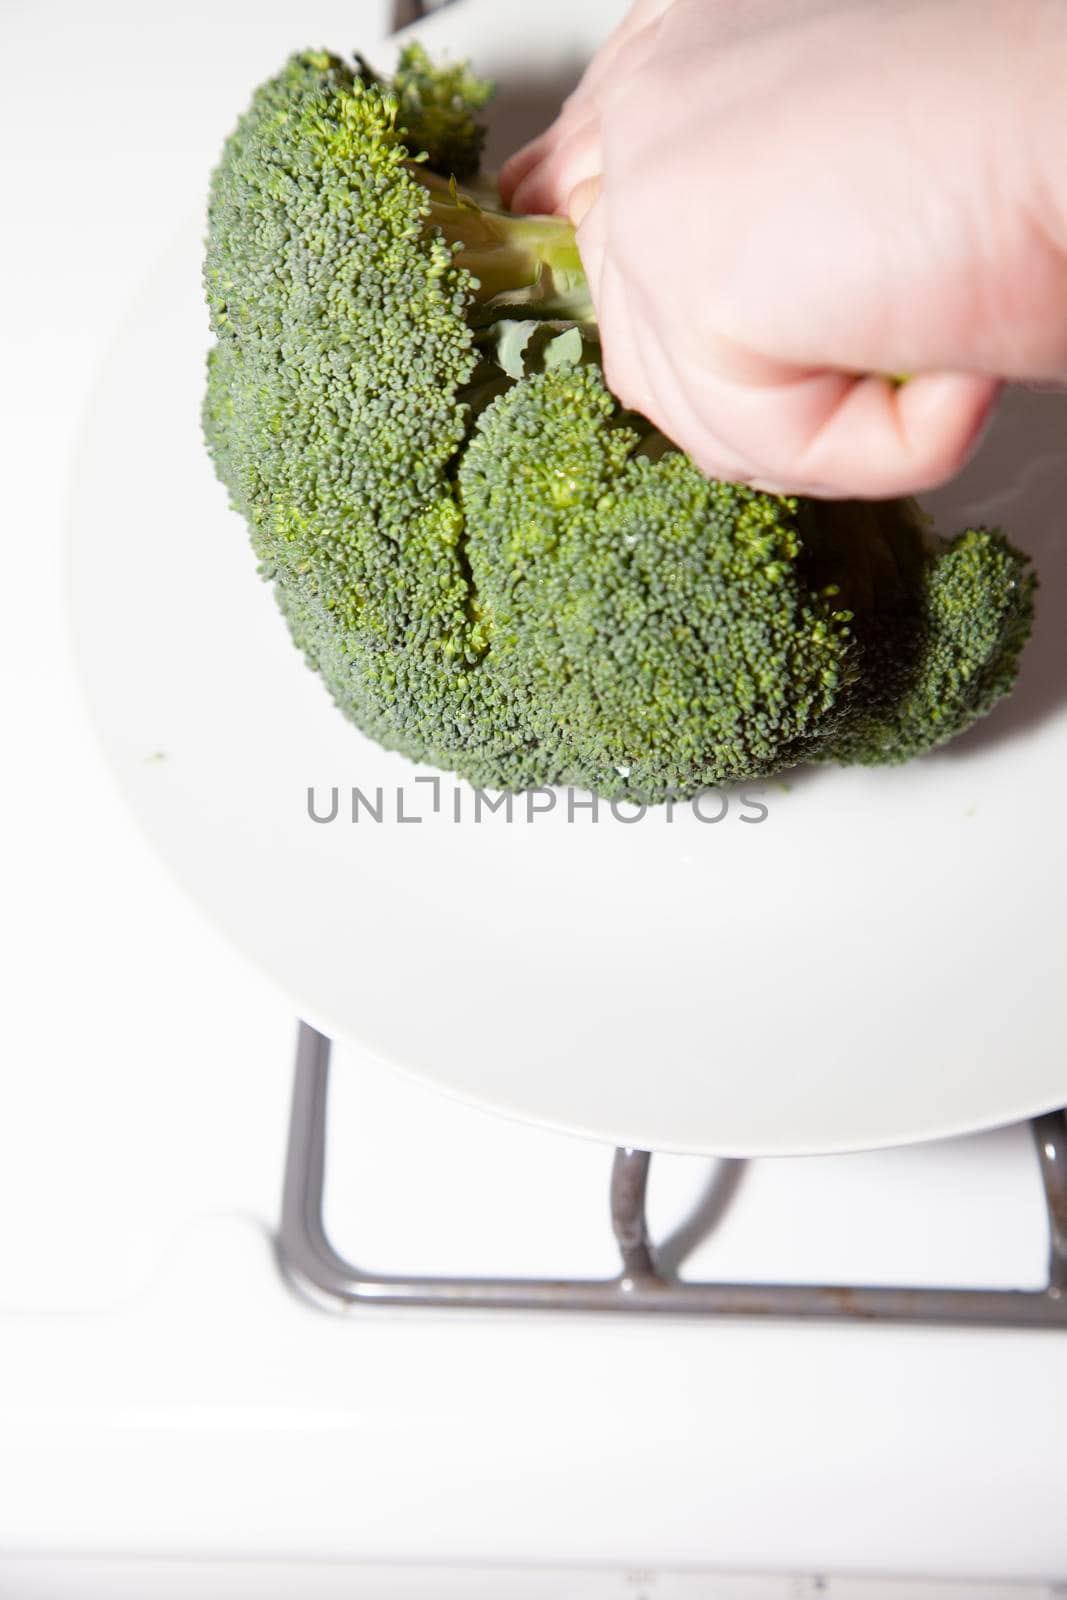 Woman's hands chopping a fresh crown of broccoli